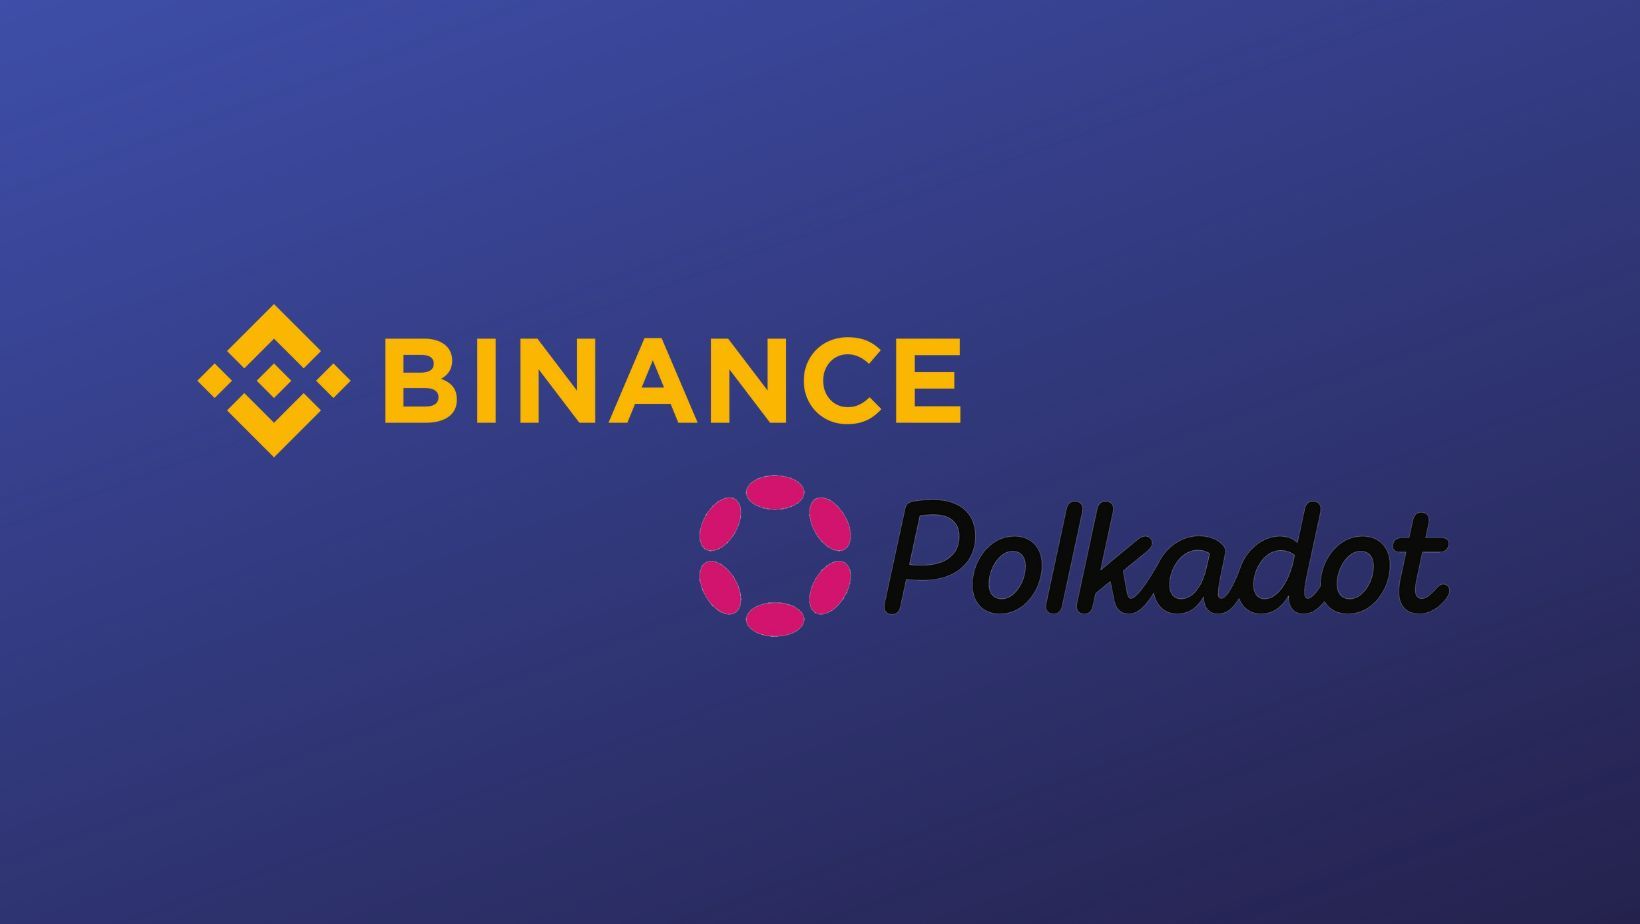 How To Buy Polkadot: Easy 5 Steps Guide